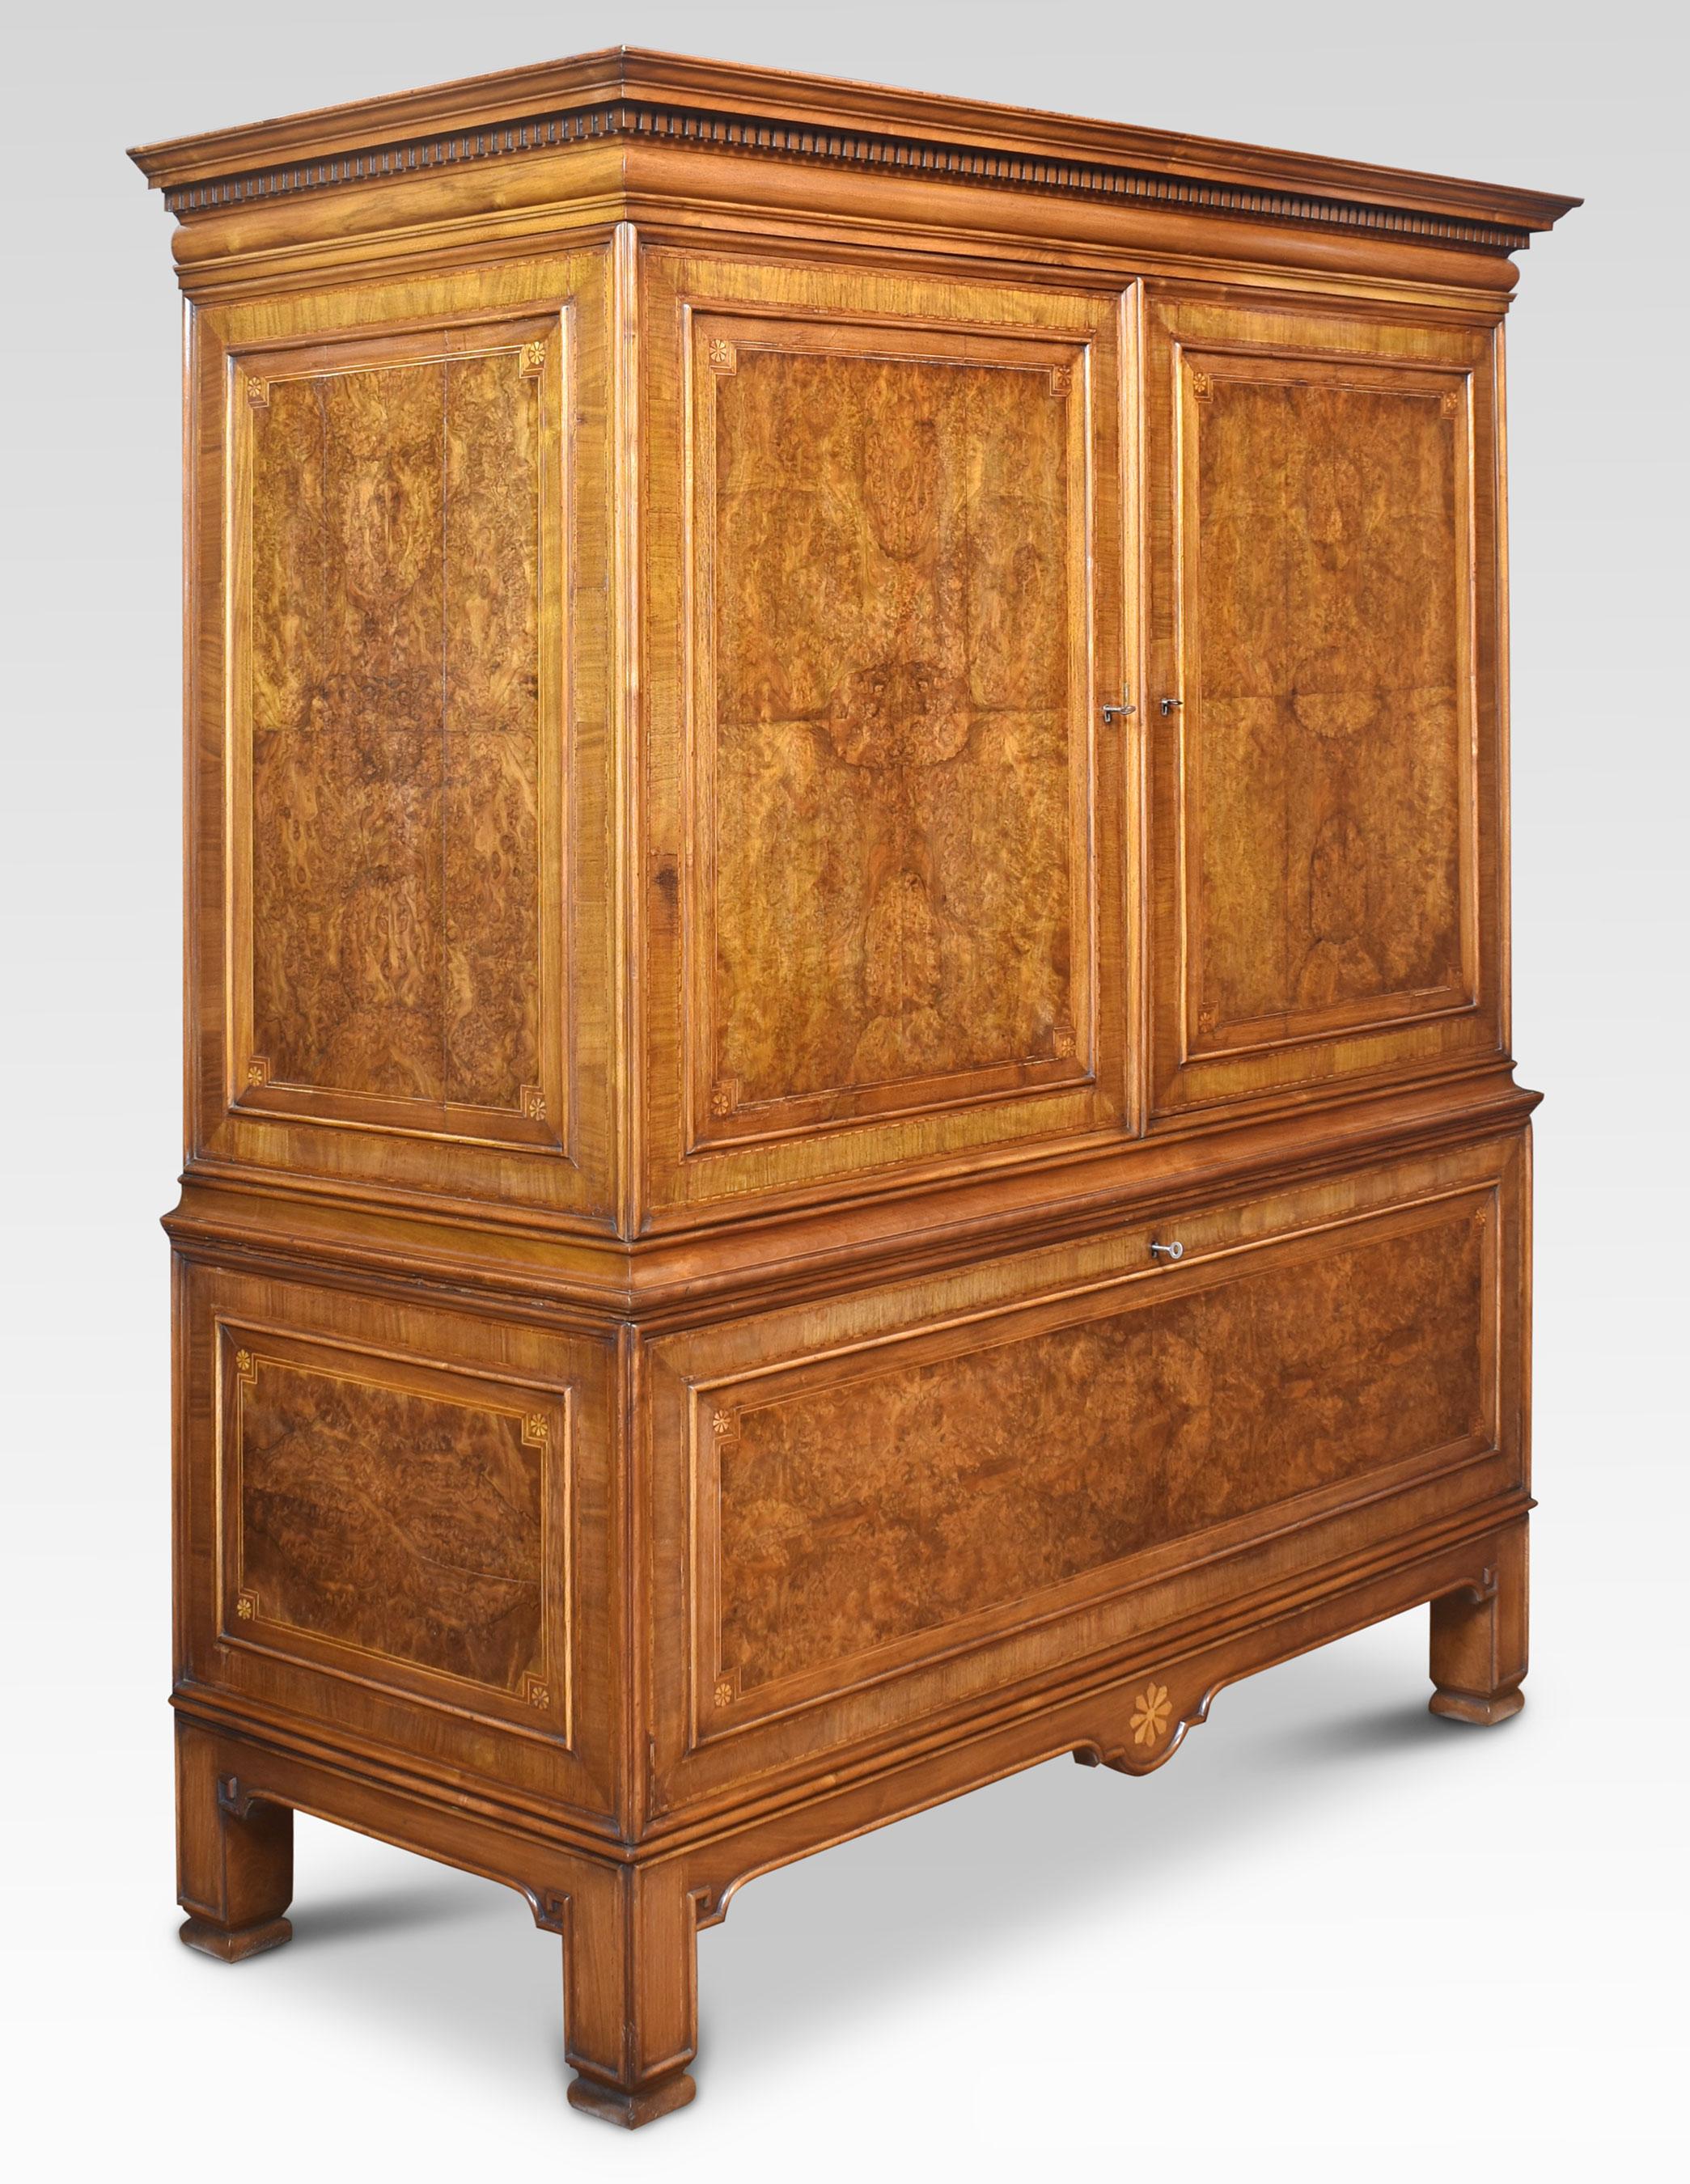 Press cupboard of nice proportions. Having moulded cornice above the large well-figured walnut panelled doors opening to reveal a large cupboard surrounded by four drawers. The base section with unusual well-figured walnut drop-down cupboard door